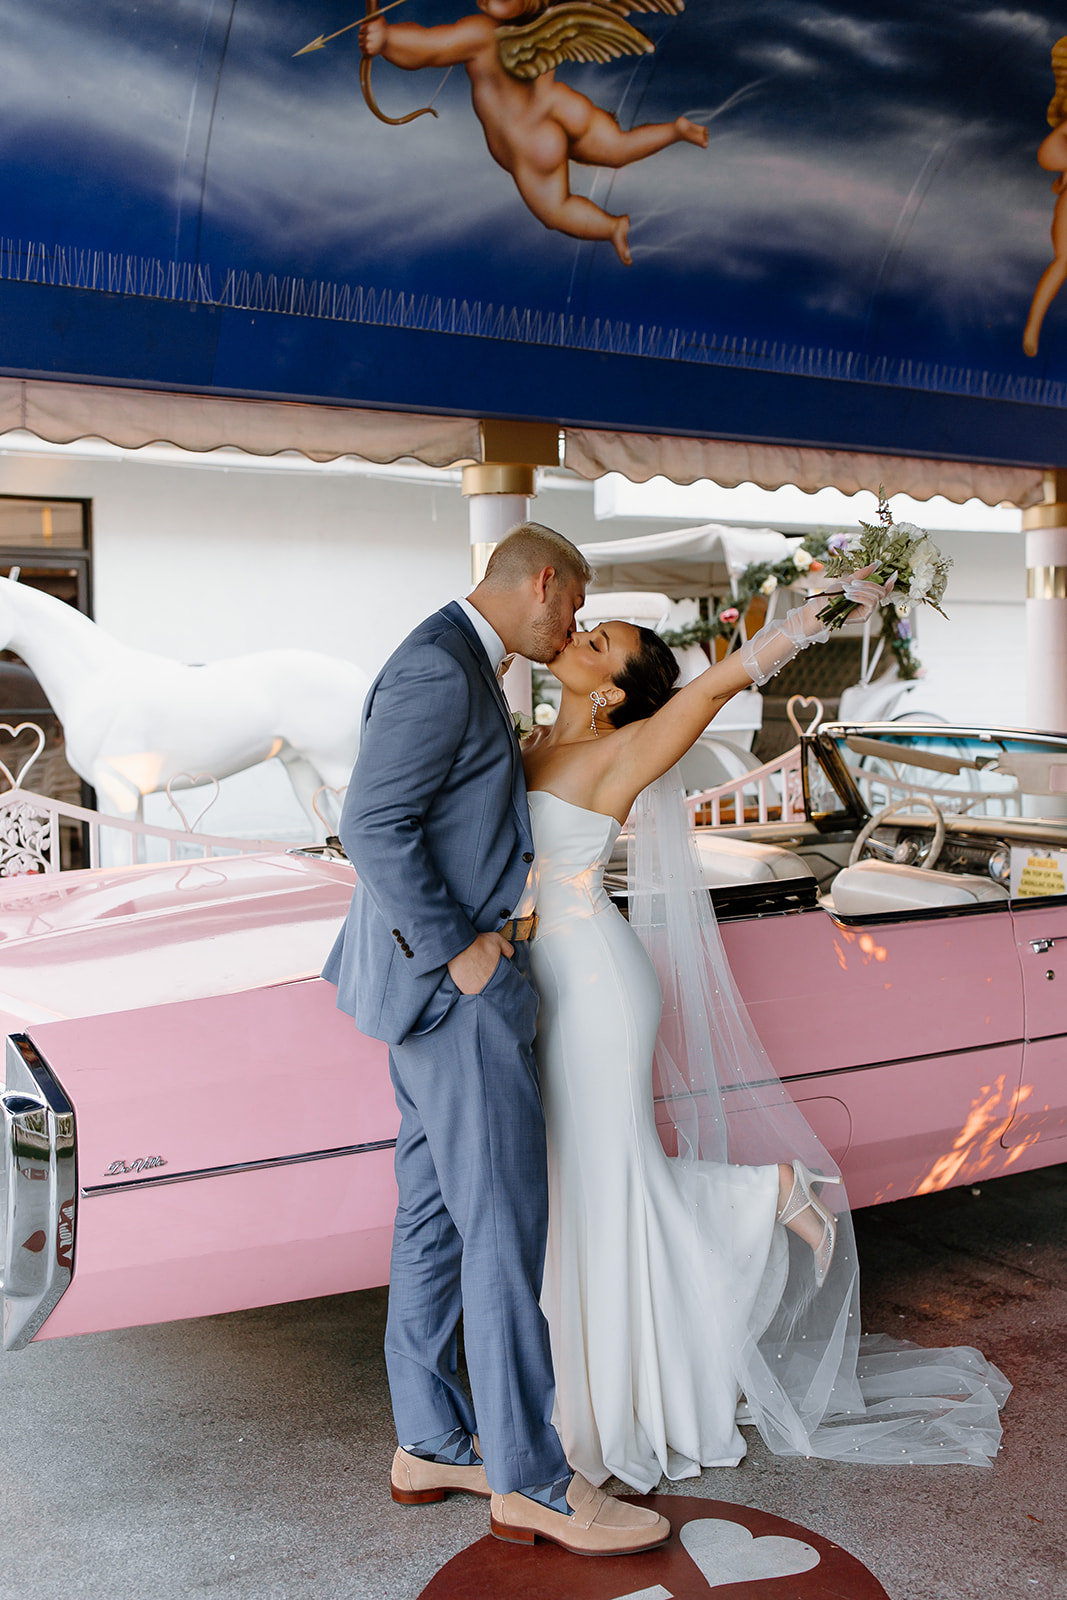 Bride and groom kissing in front of a pink convertible